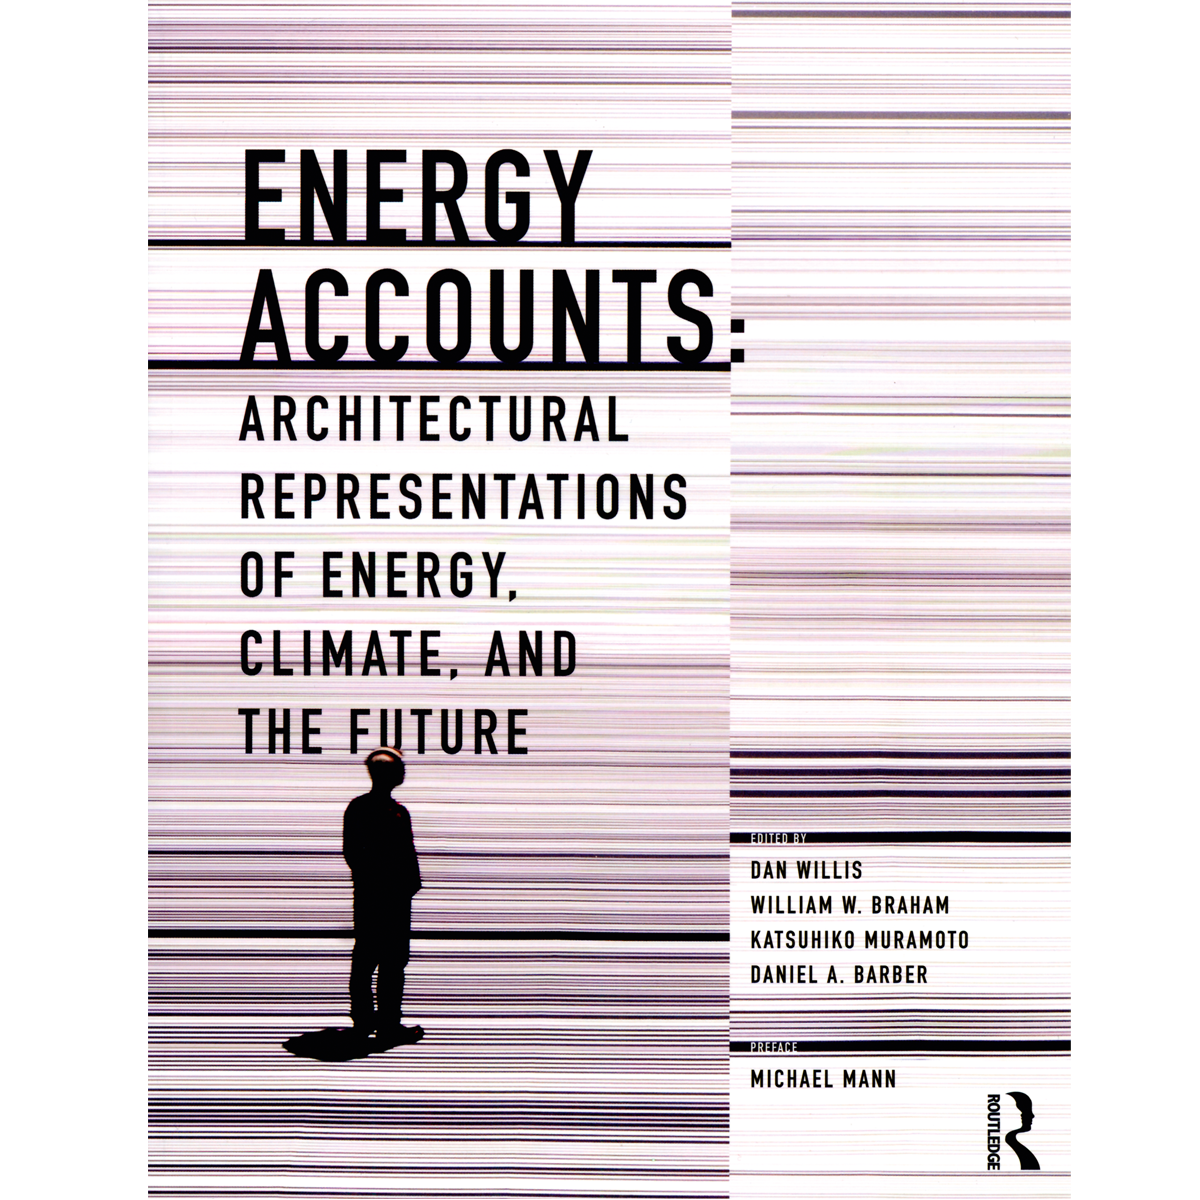 Energy Accounts: Architectural Representations of Energy, Climate and the Future